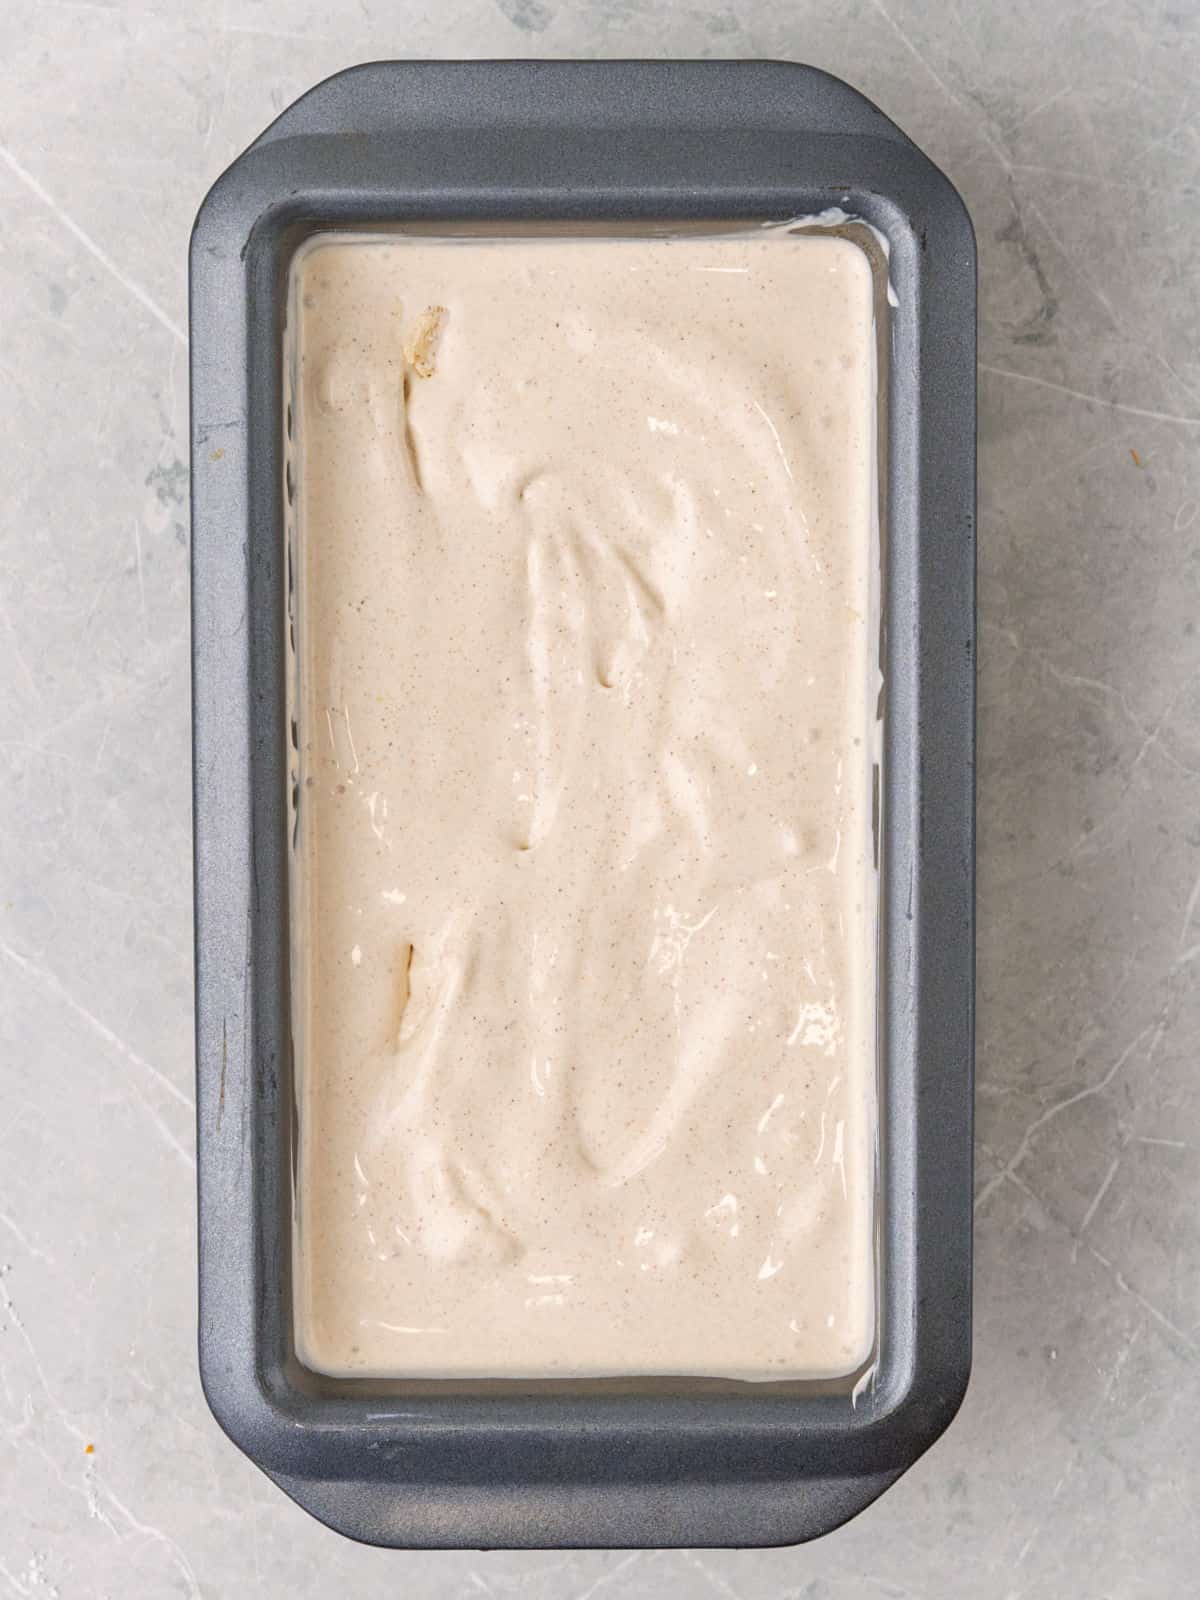 Rectangular metal loaf pan with cinnamon ice cream before freezing. Light gray surface.